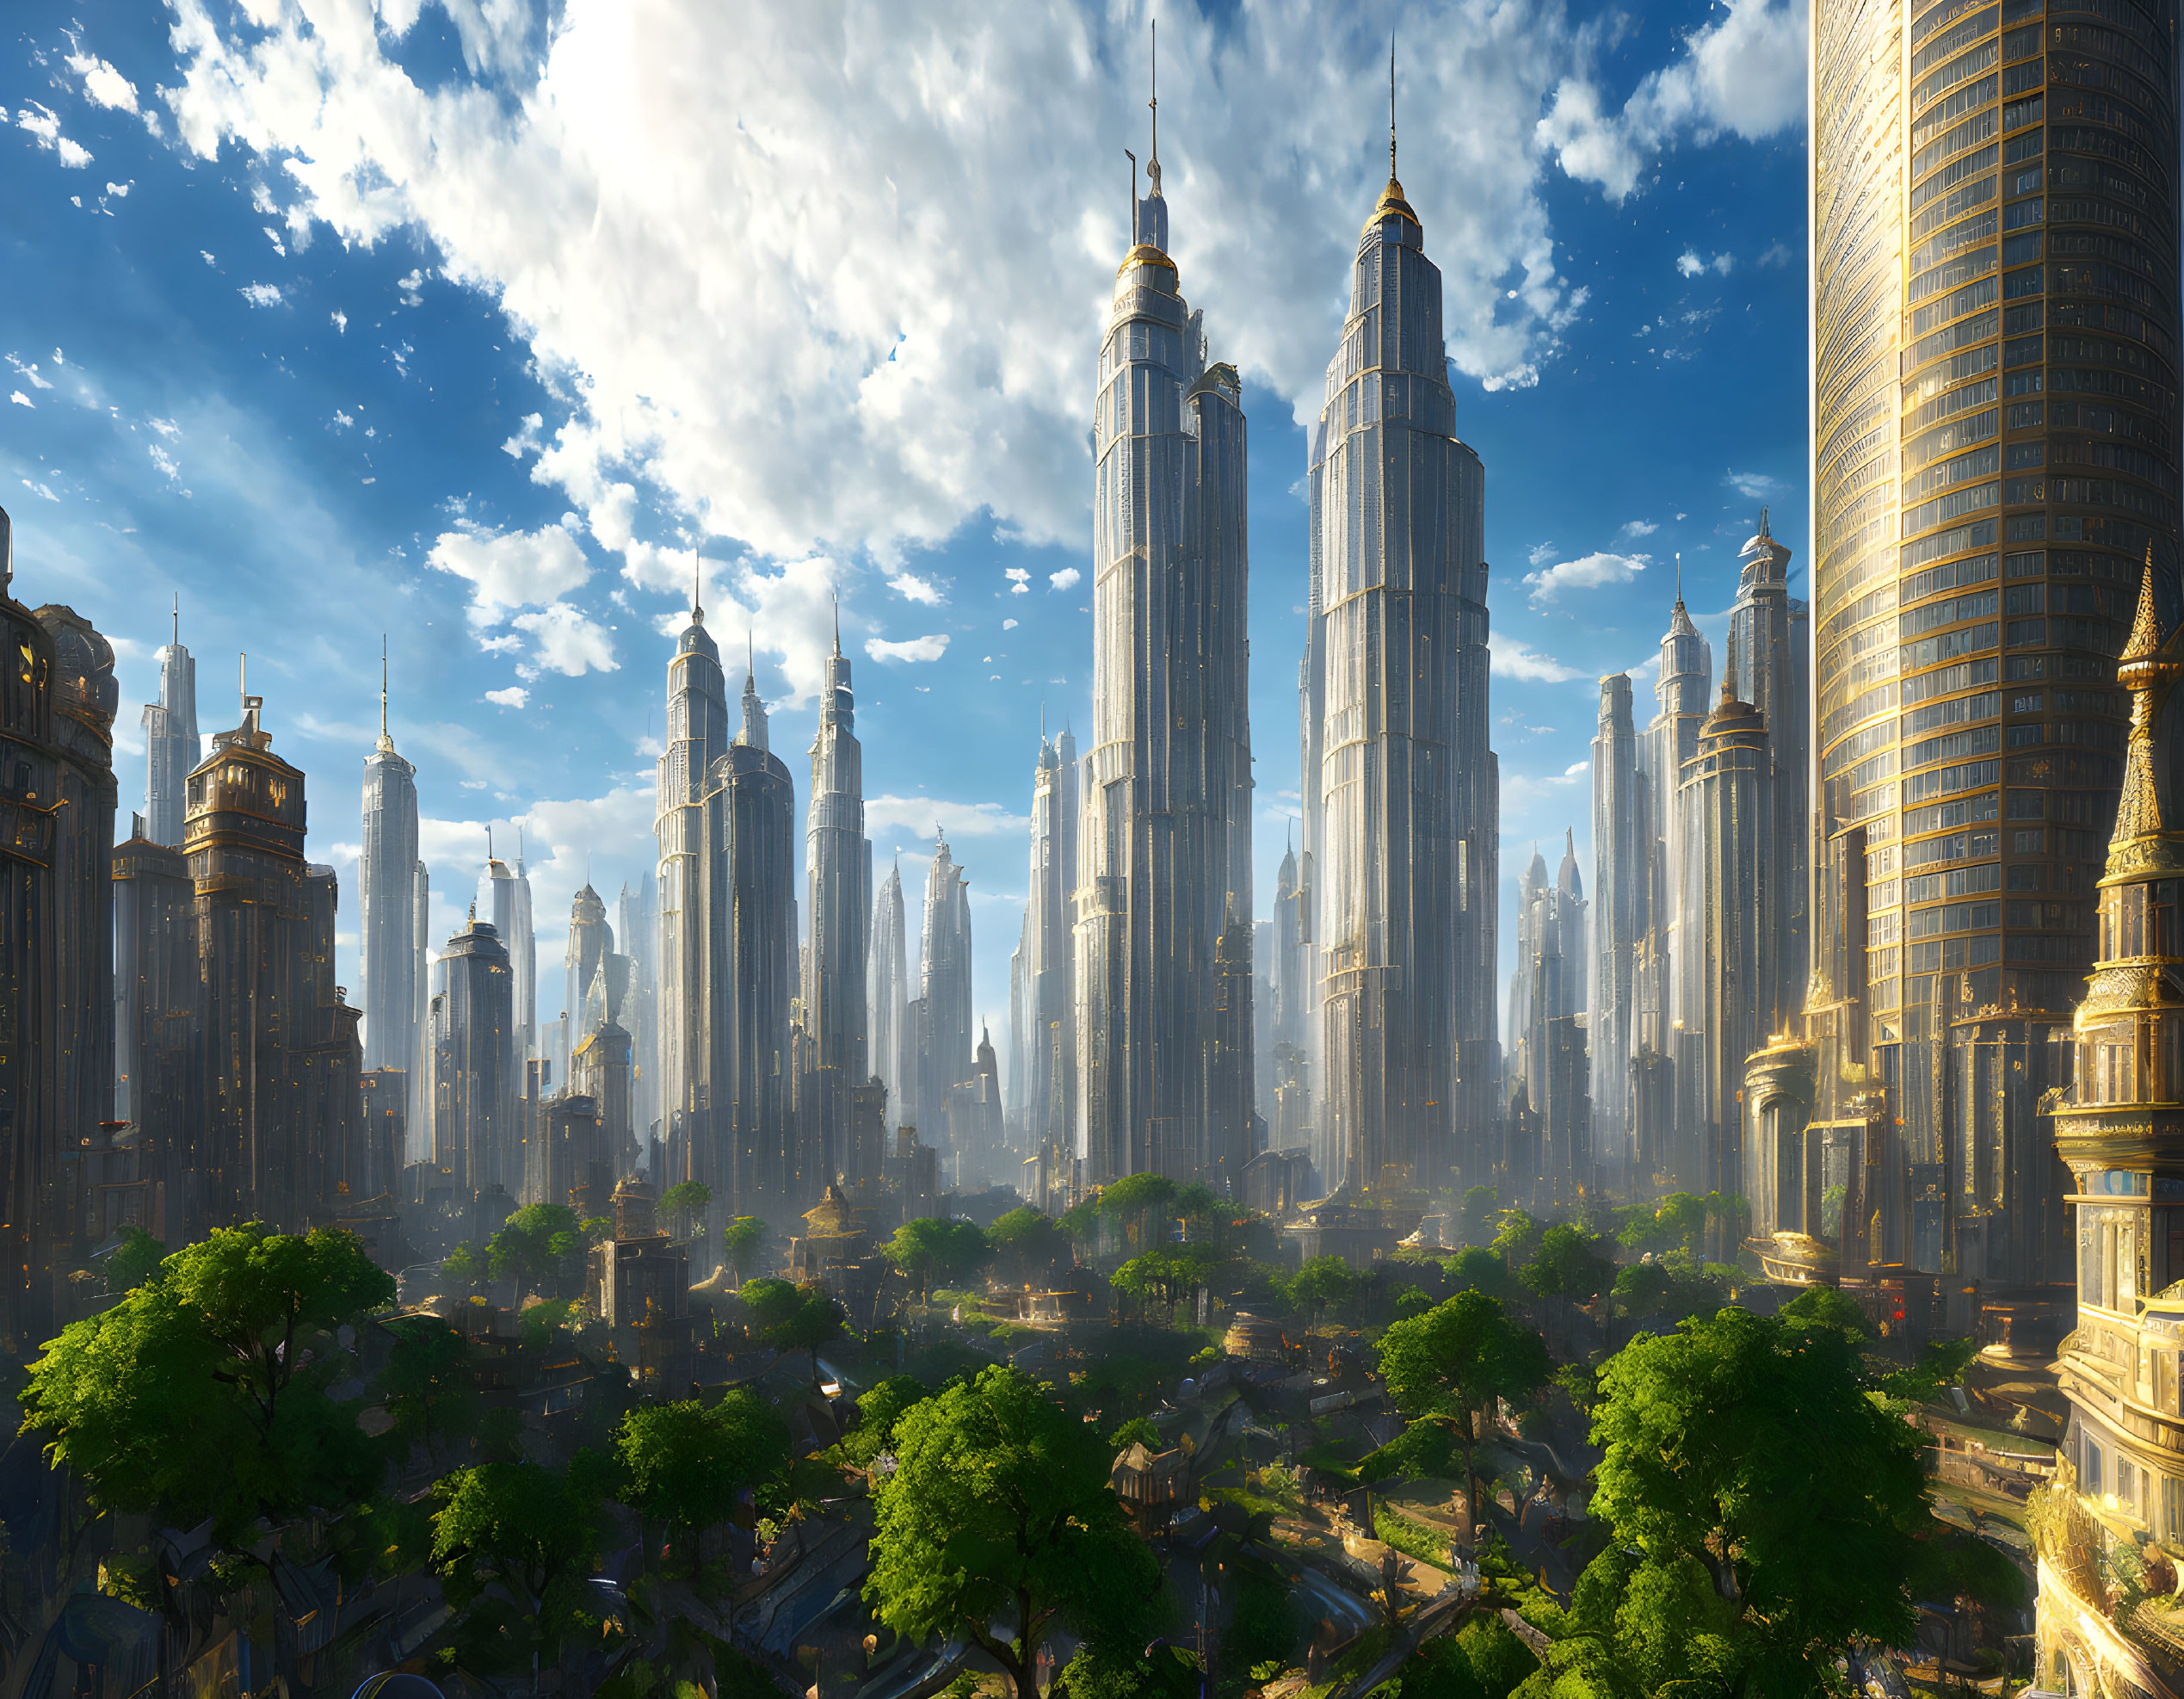 Futuristic cityscape with skyscrapers, greenery, and sunlight rays